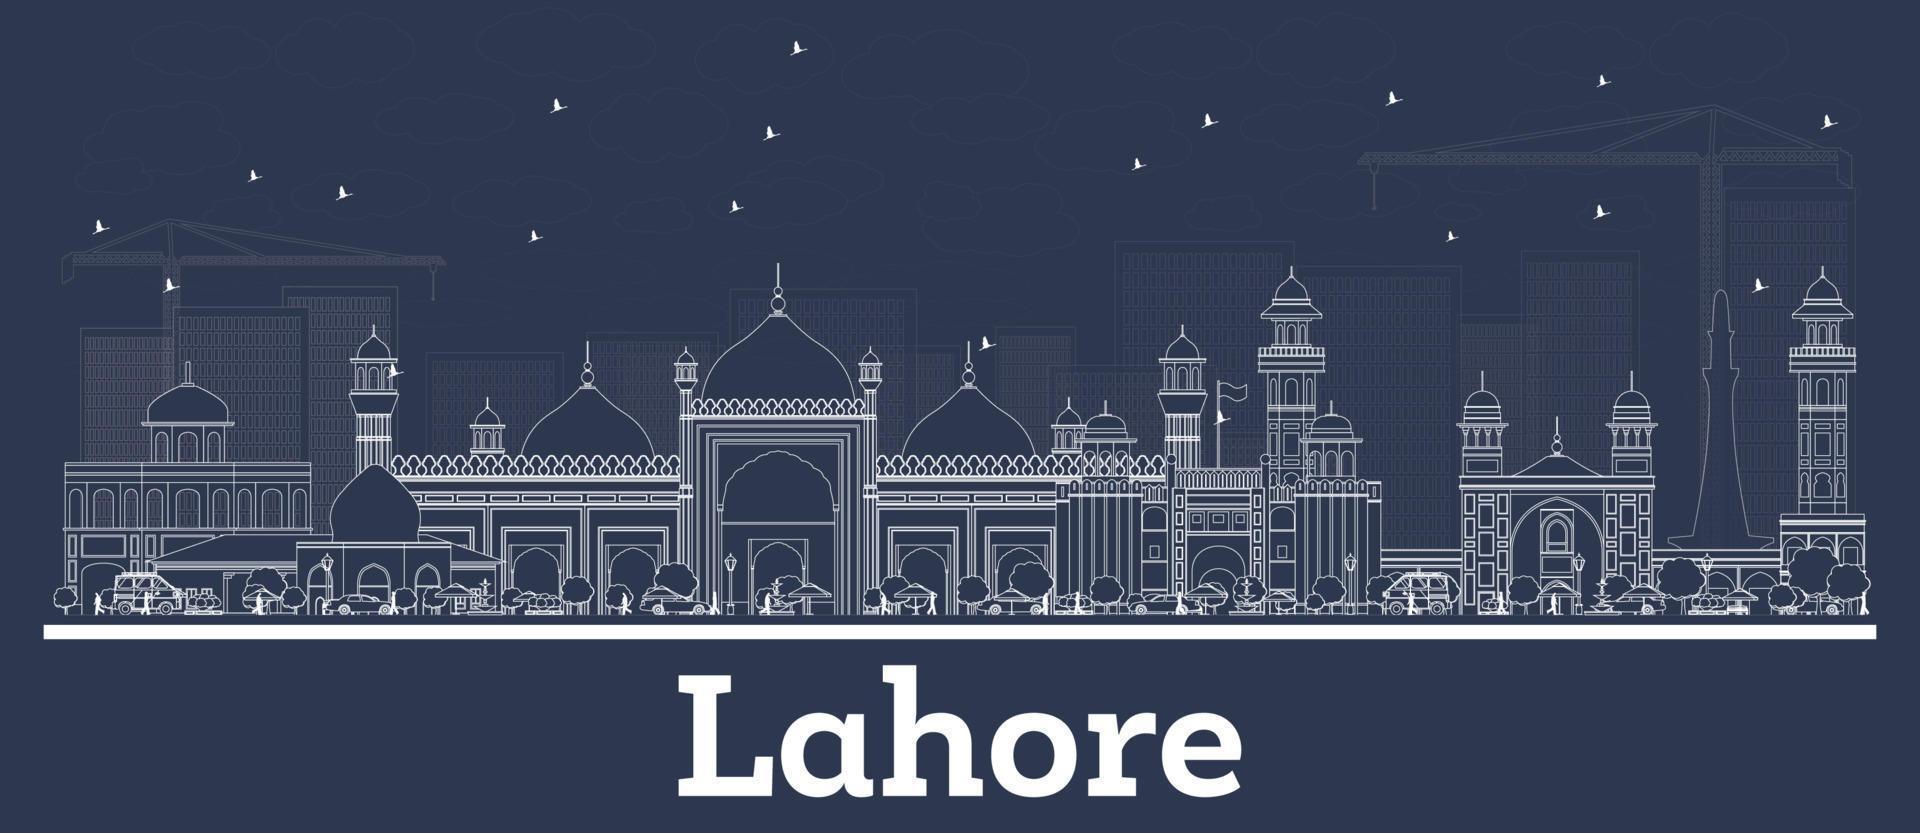 Outline Lahore Pakistan City Skyline with White Buildings. vector